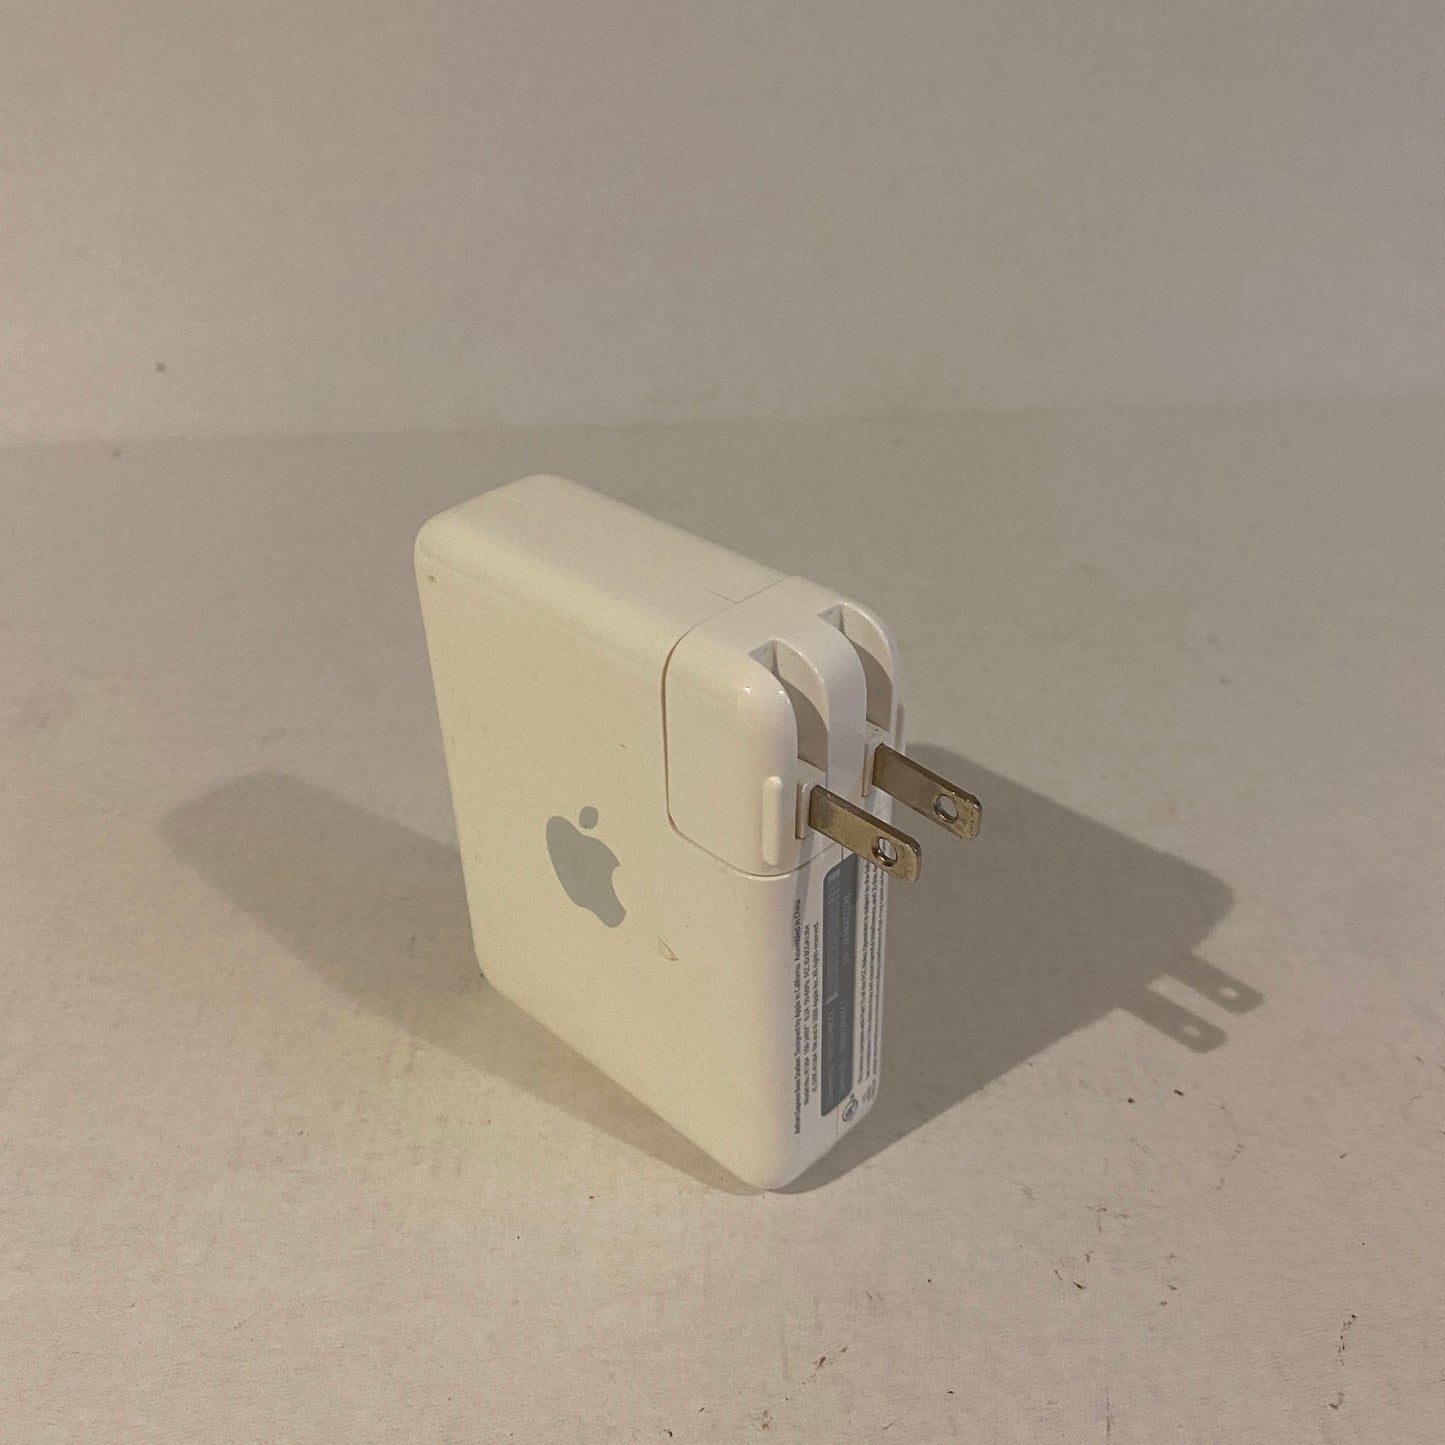 1st Generation Apple Airport Express Base Station - A1264